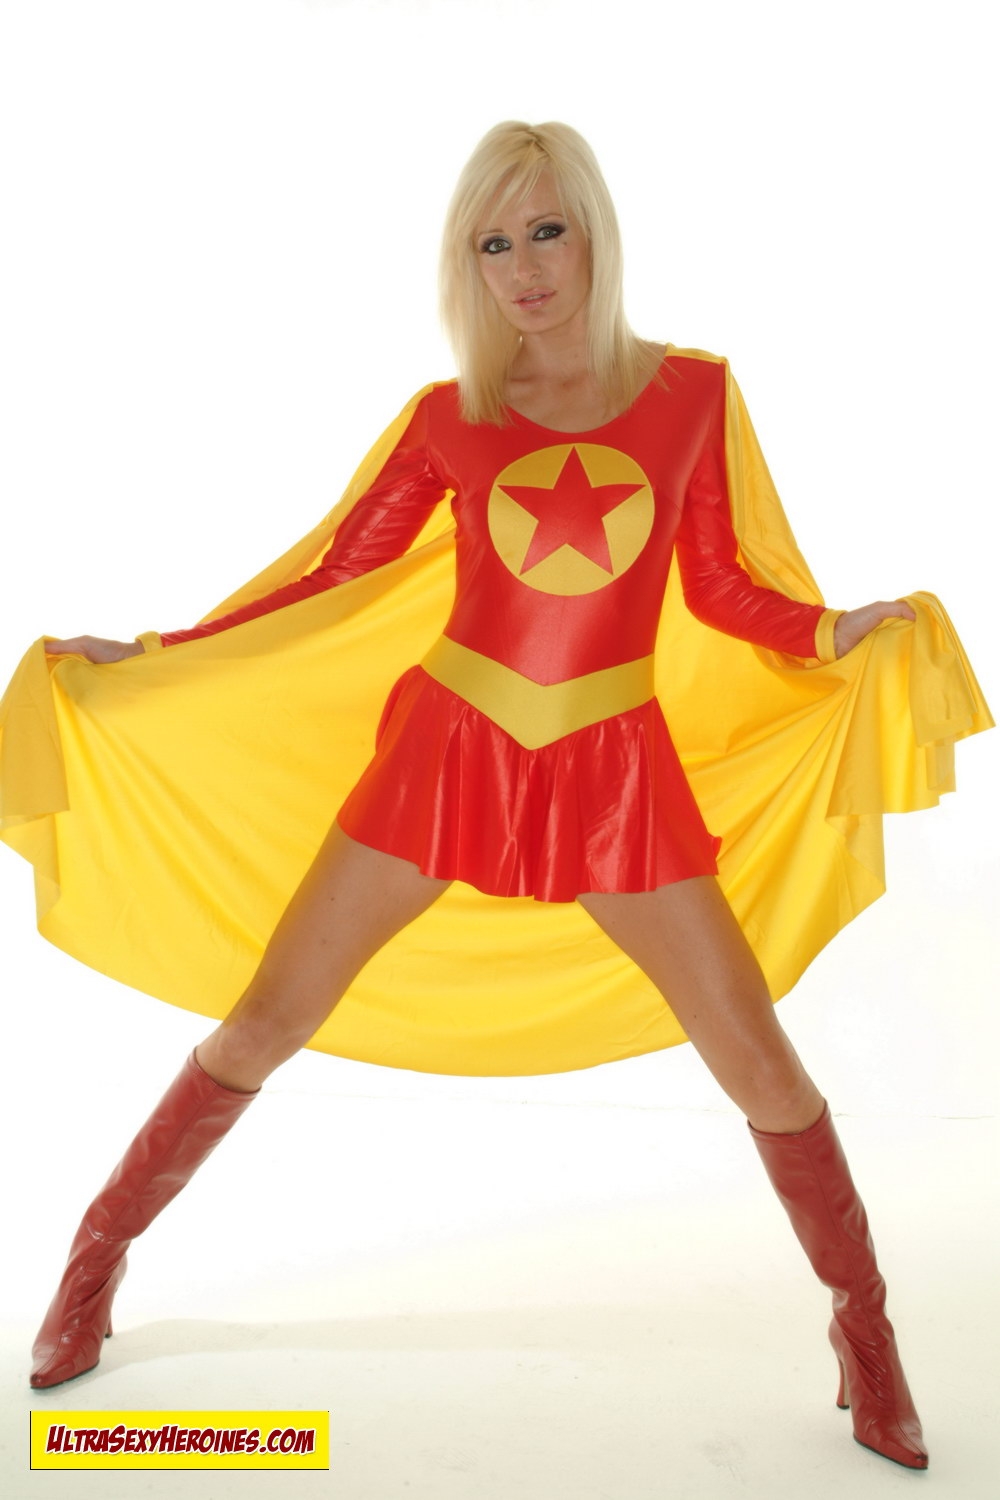 [UltraSexyHeroines] Sexy Blonde Super Heroine Cosplay Nude 141